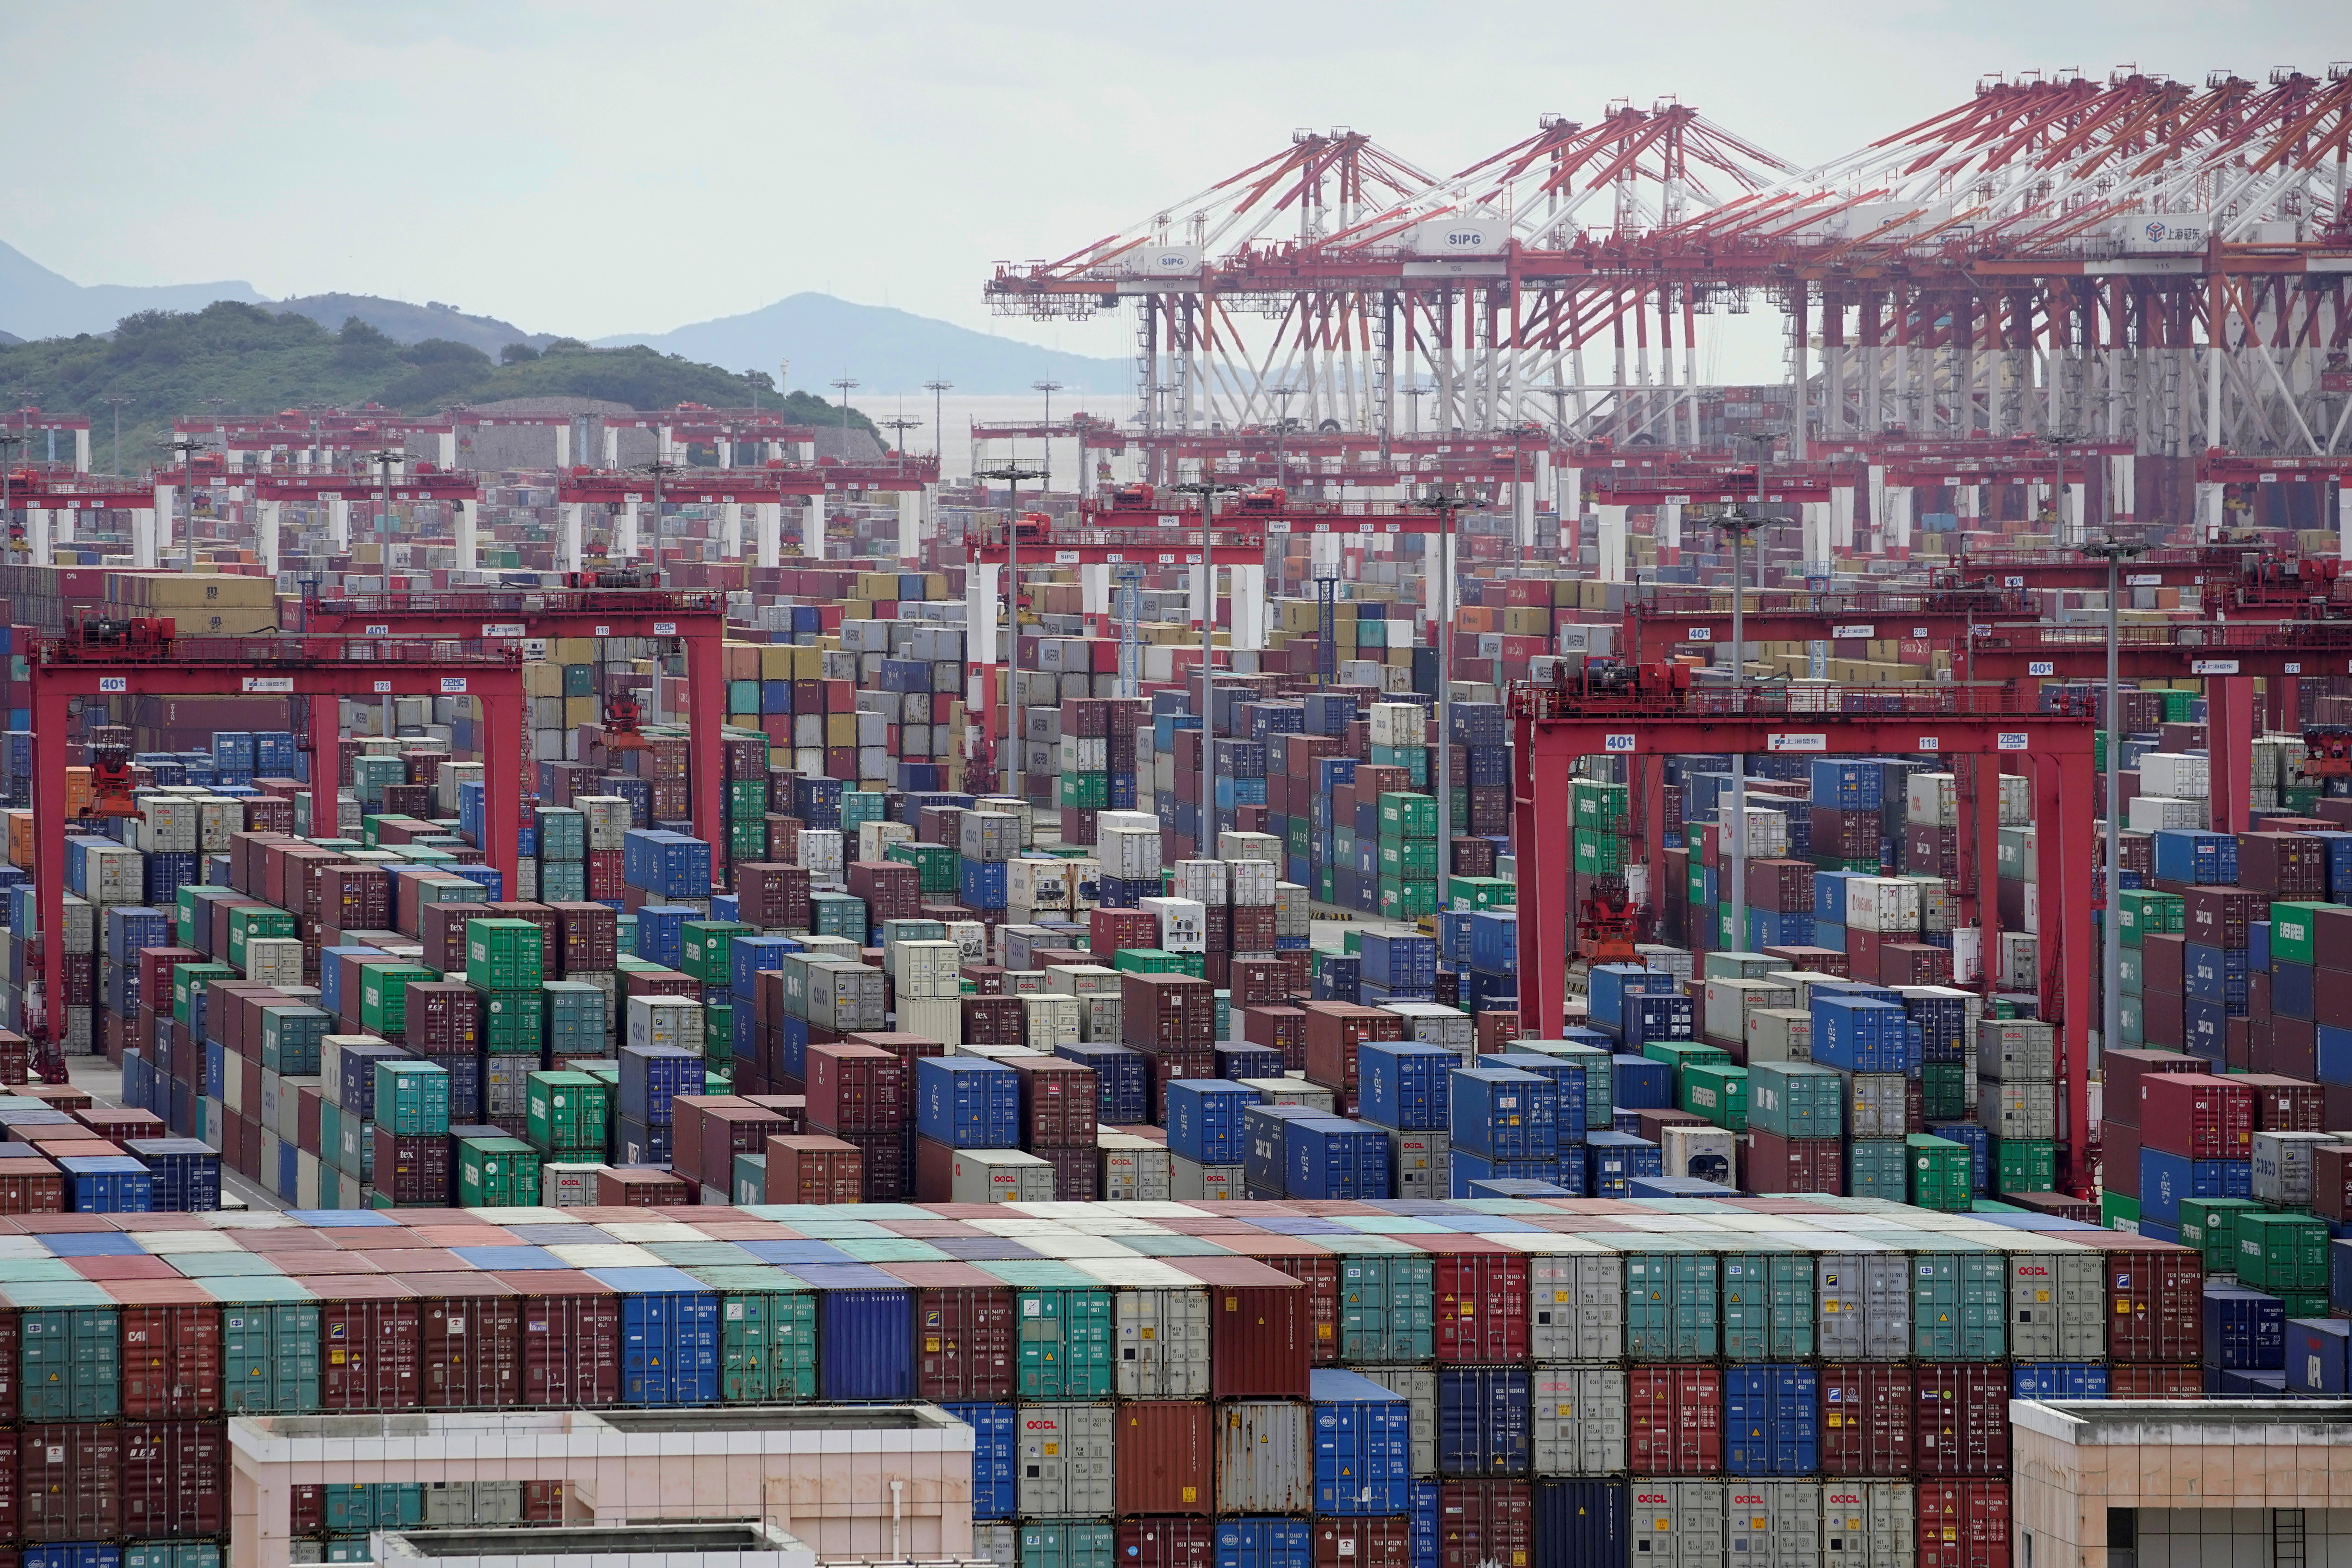 Containers are seen at the Yangshan Deep-Water Port in Shanghai, China October 19, 2020. REUTERS/Aly Song